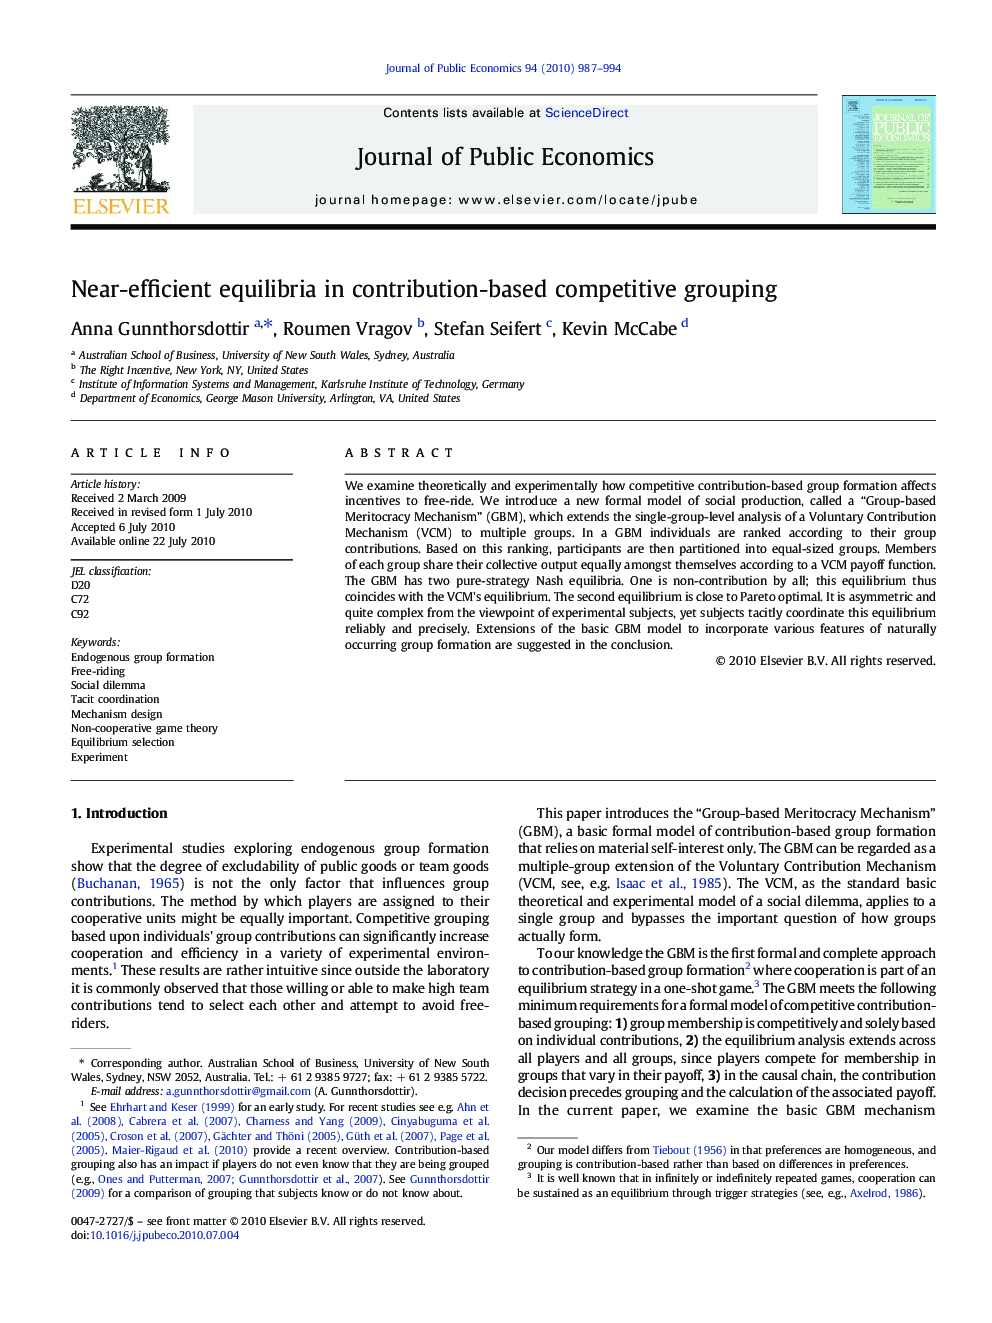 Near-efficient equilibria in contribution-based competitive grouping